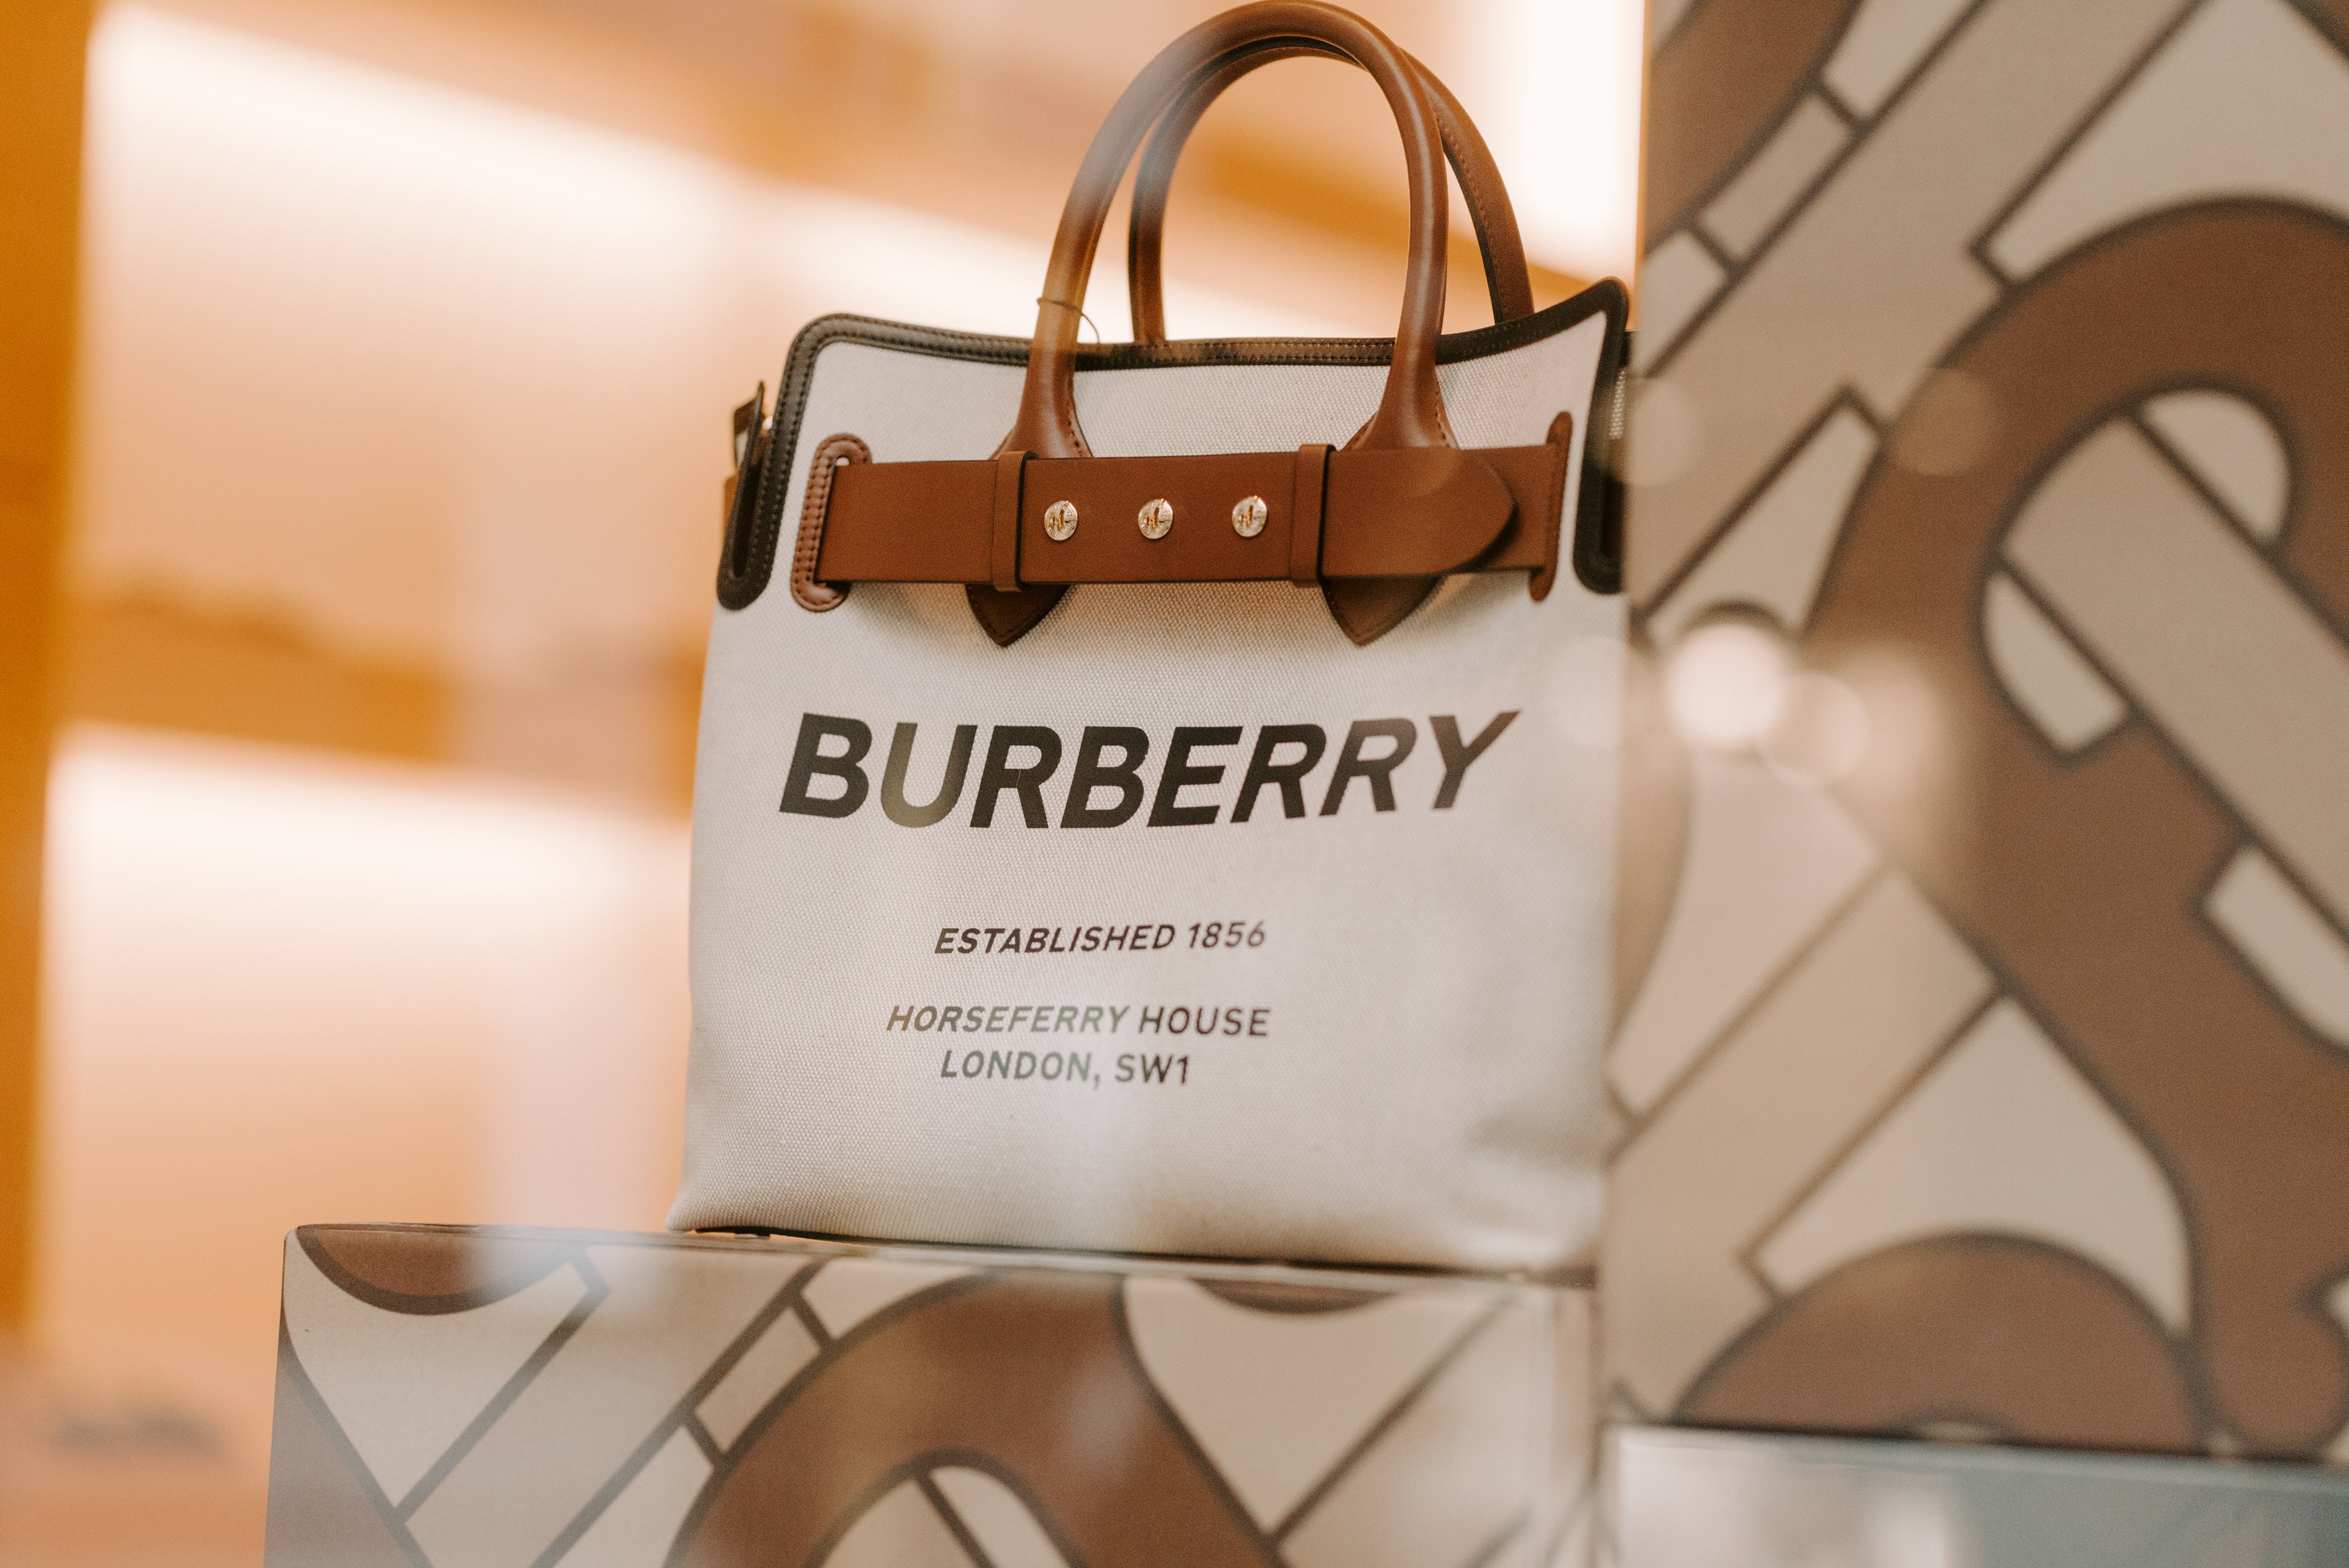 BURBERRY BLUE LABEL Shoulder Hand Bag Purse Nylon Leather Pink H3629 |  Purses and bags, Purses, Bags